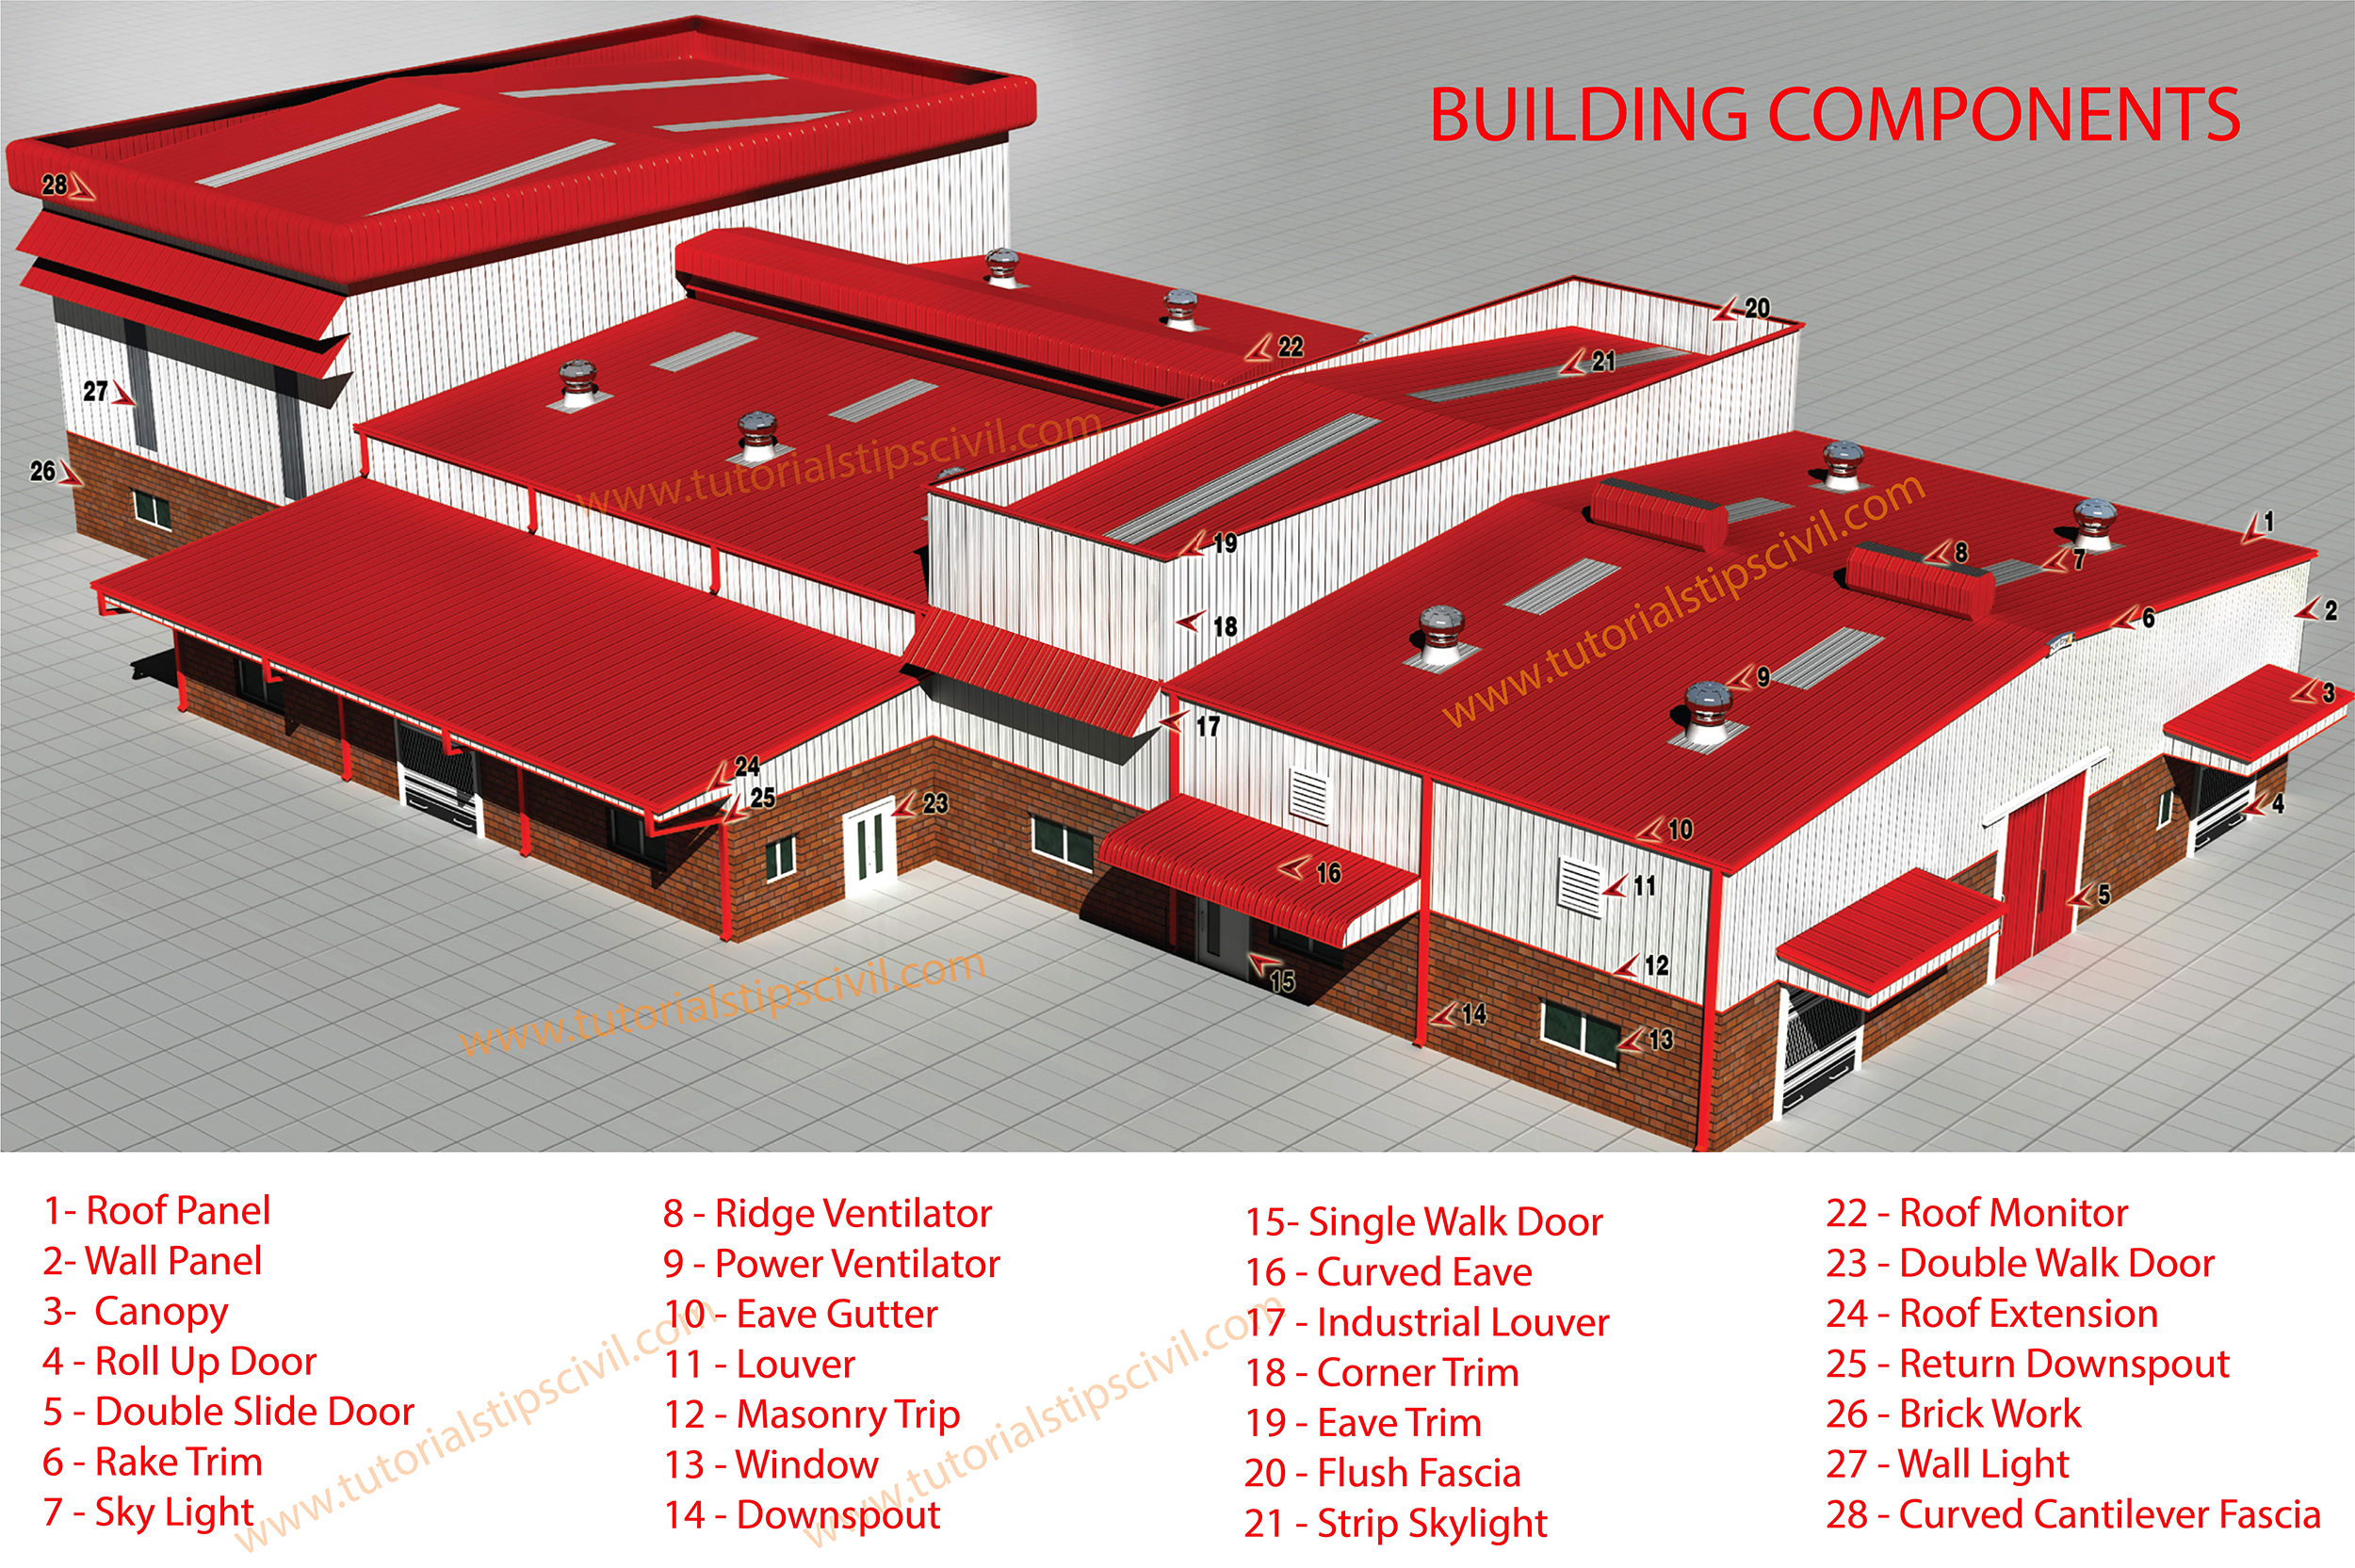 COMPONENTS OF PRE-ENGINEERED BUILDINGS (PEB)